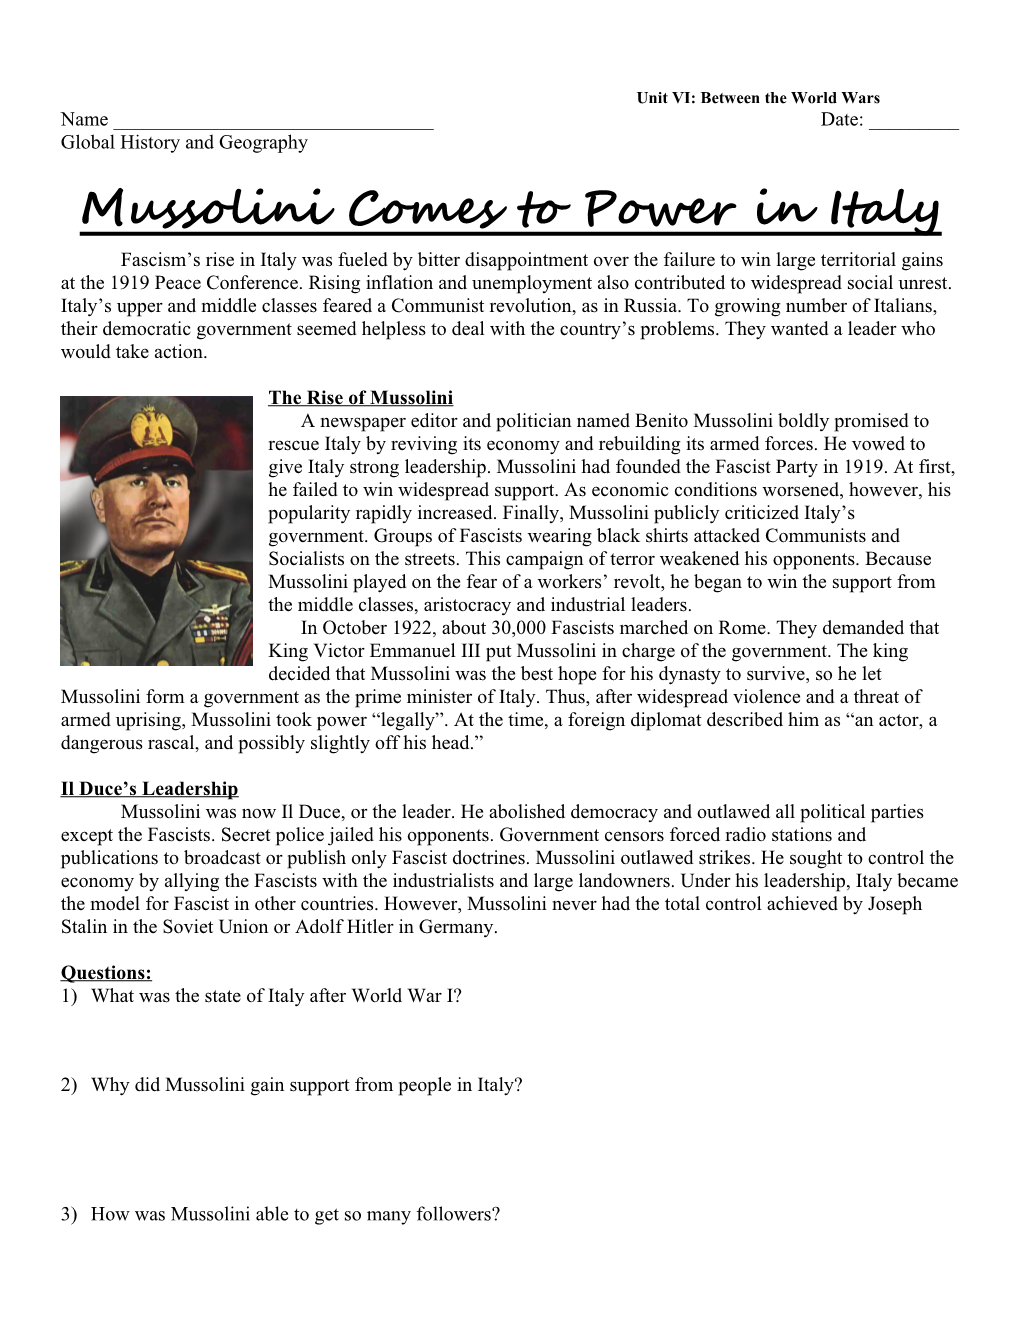 Mussolini Comes to Power in Italy